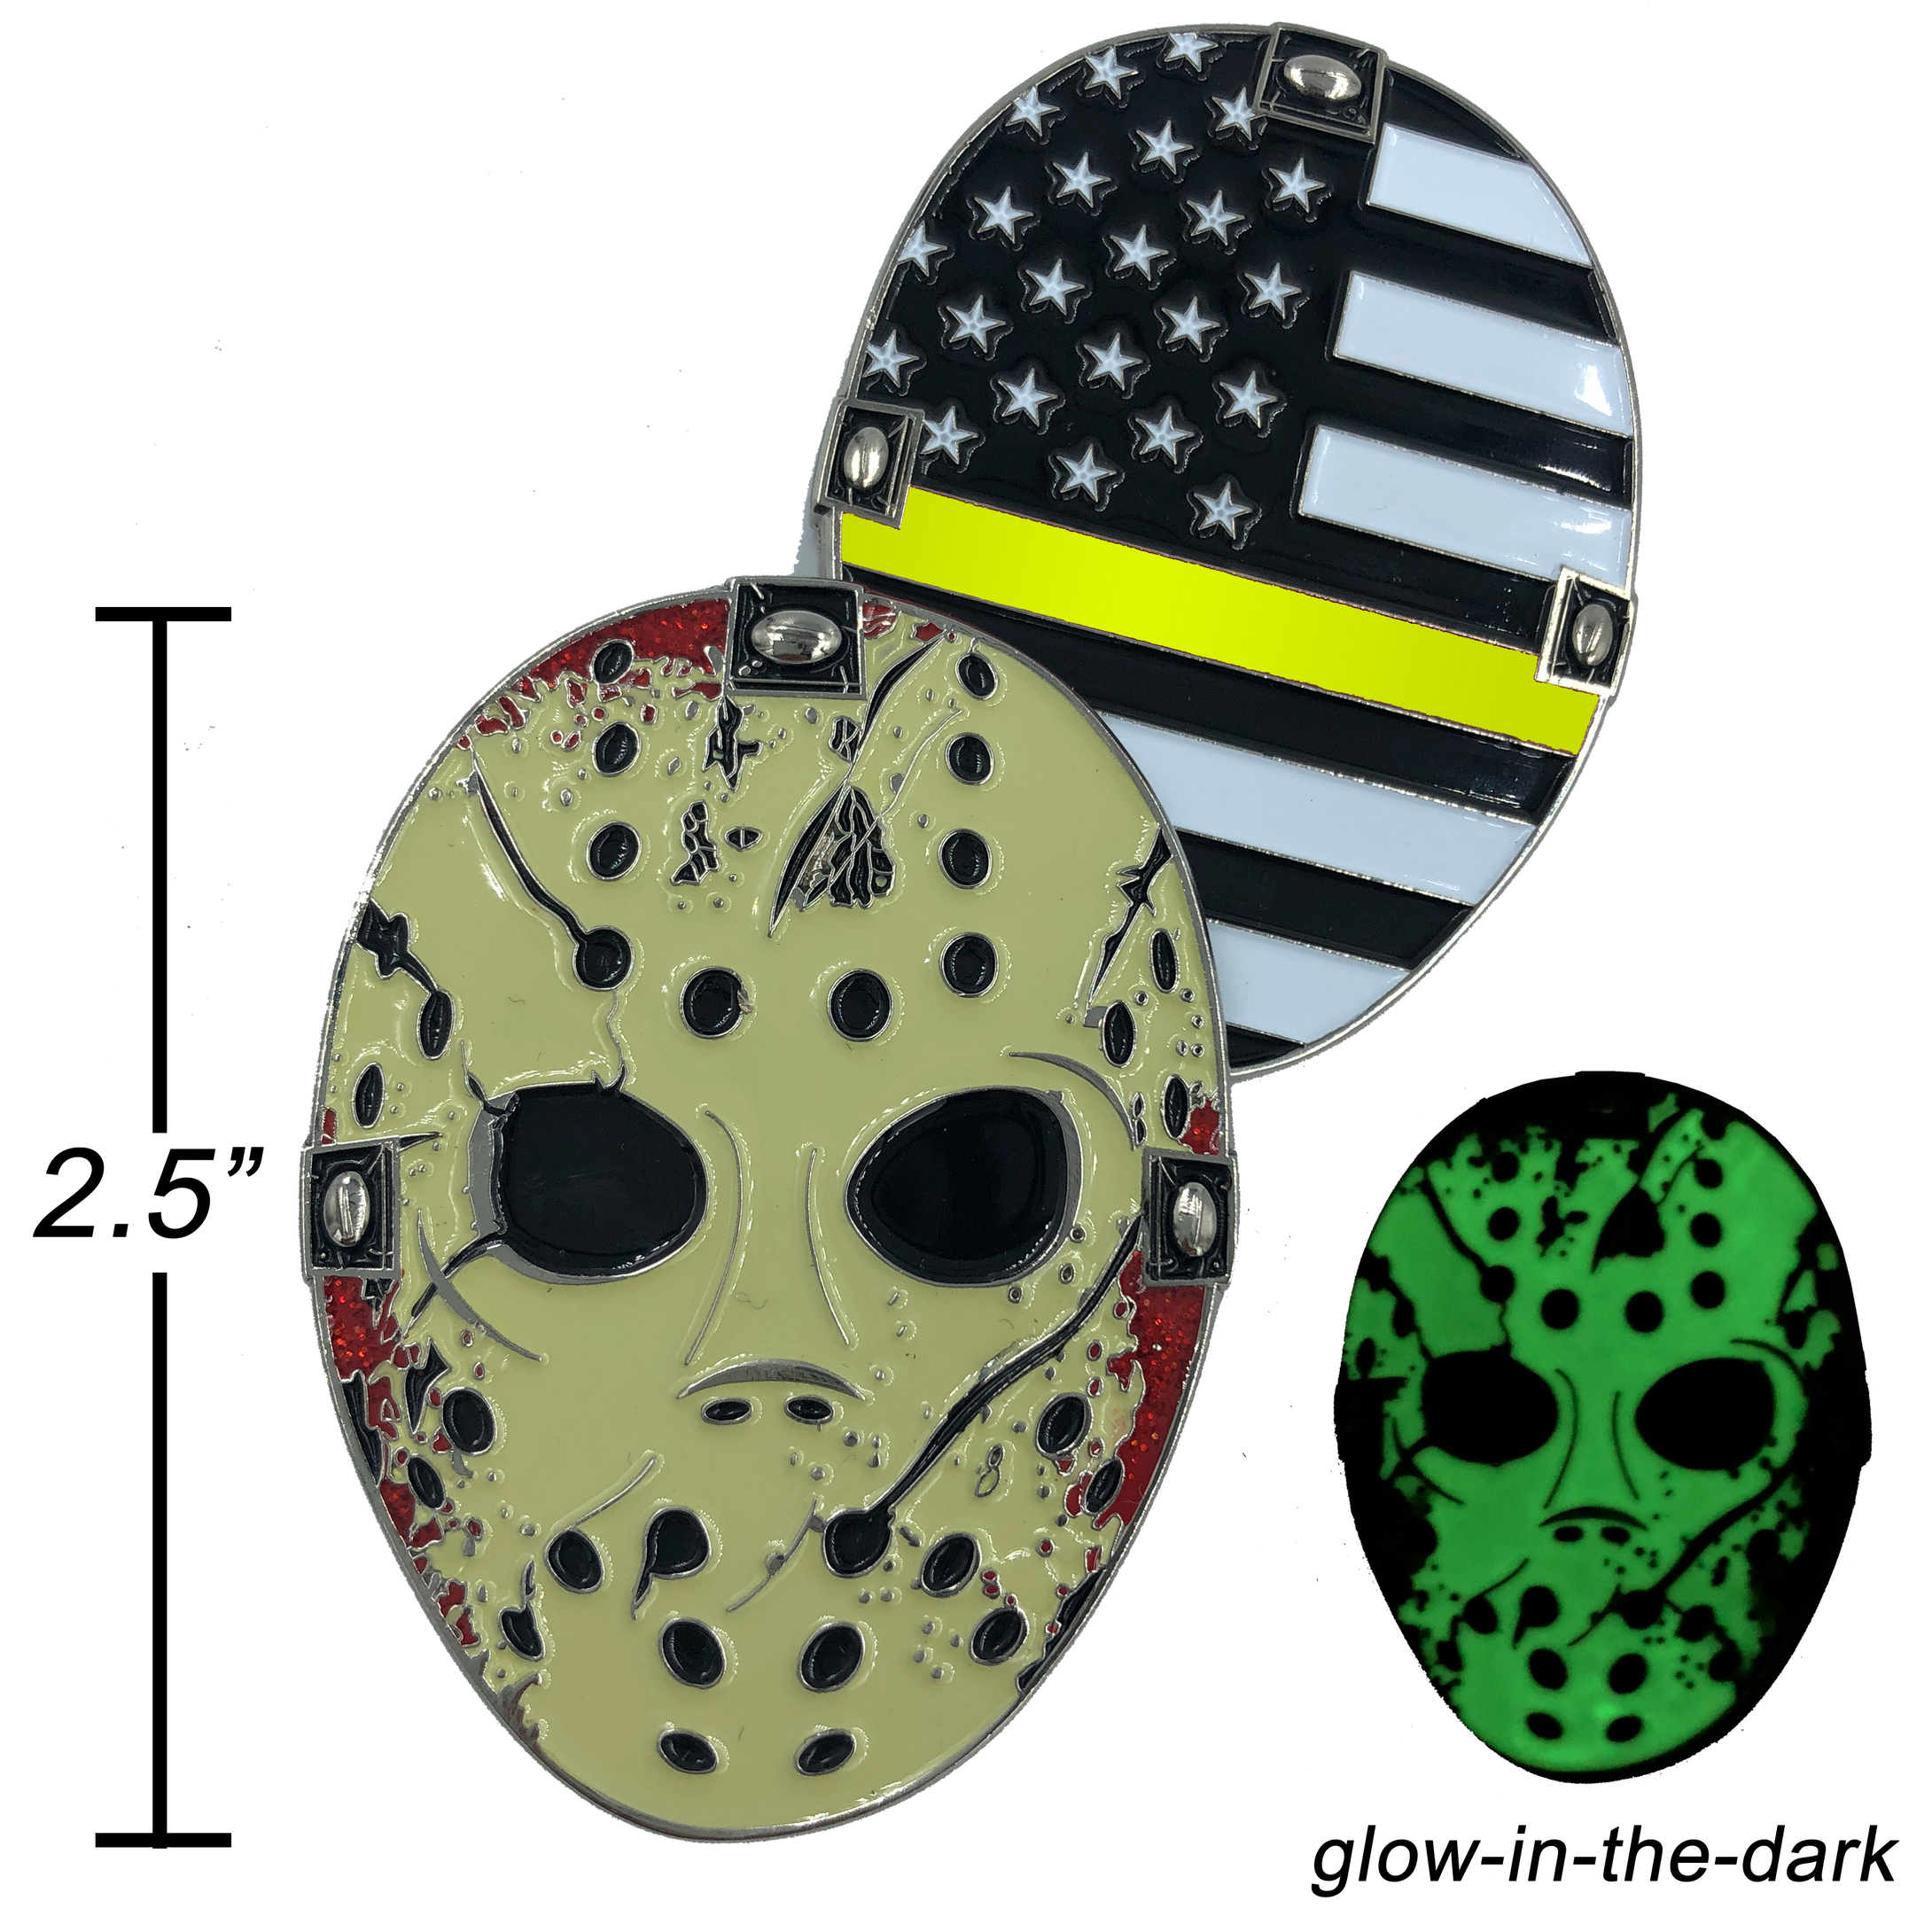 F-022 Thin Gold Line Jason Voorhees Challenge Coin Friday the 13th 911 Emergency Dispatcher Yellow TRUCKER truck driver